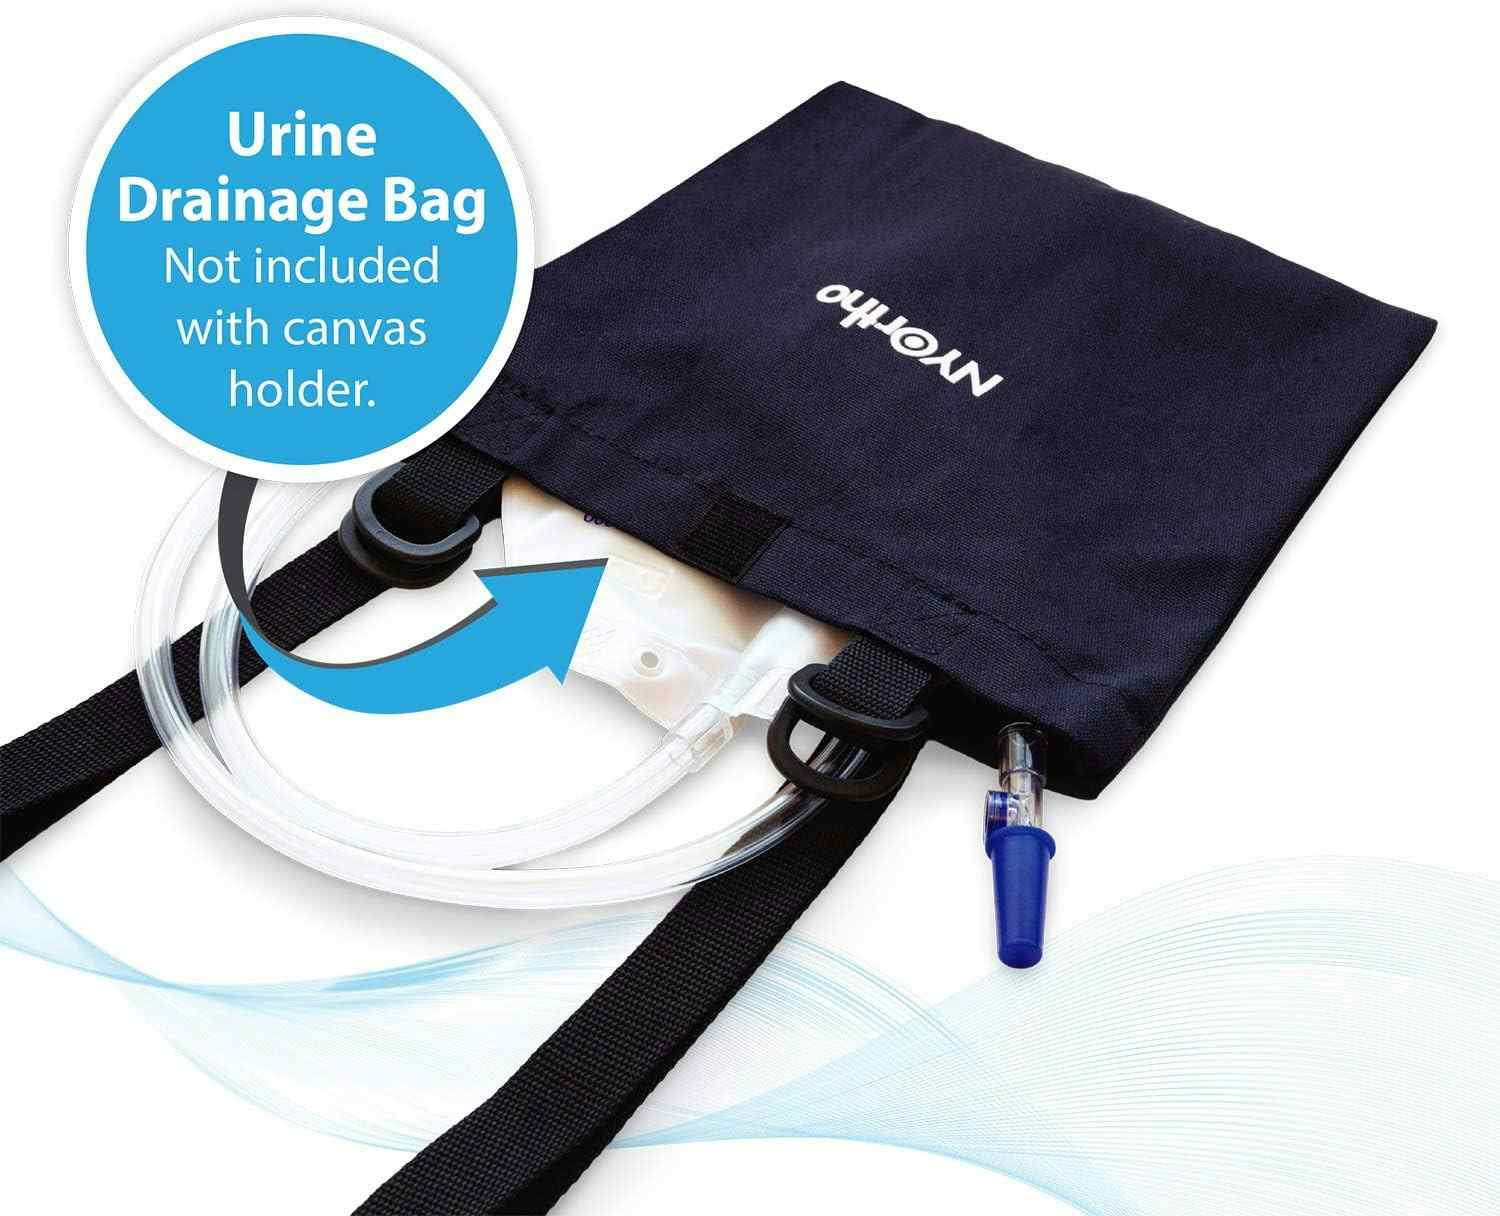 NYOrtho Vinyl Urinary Drain Bag Holder For Use With Wheelchair